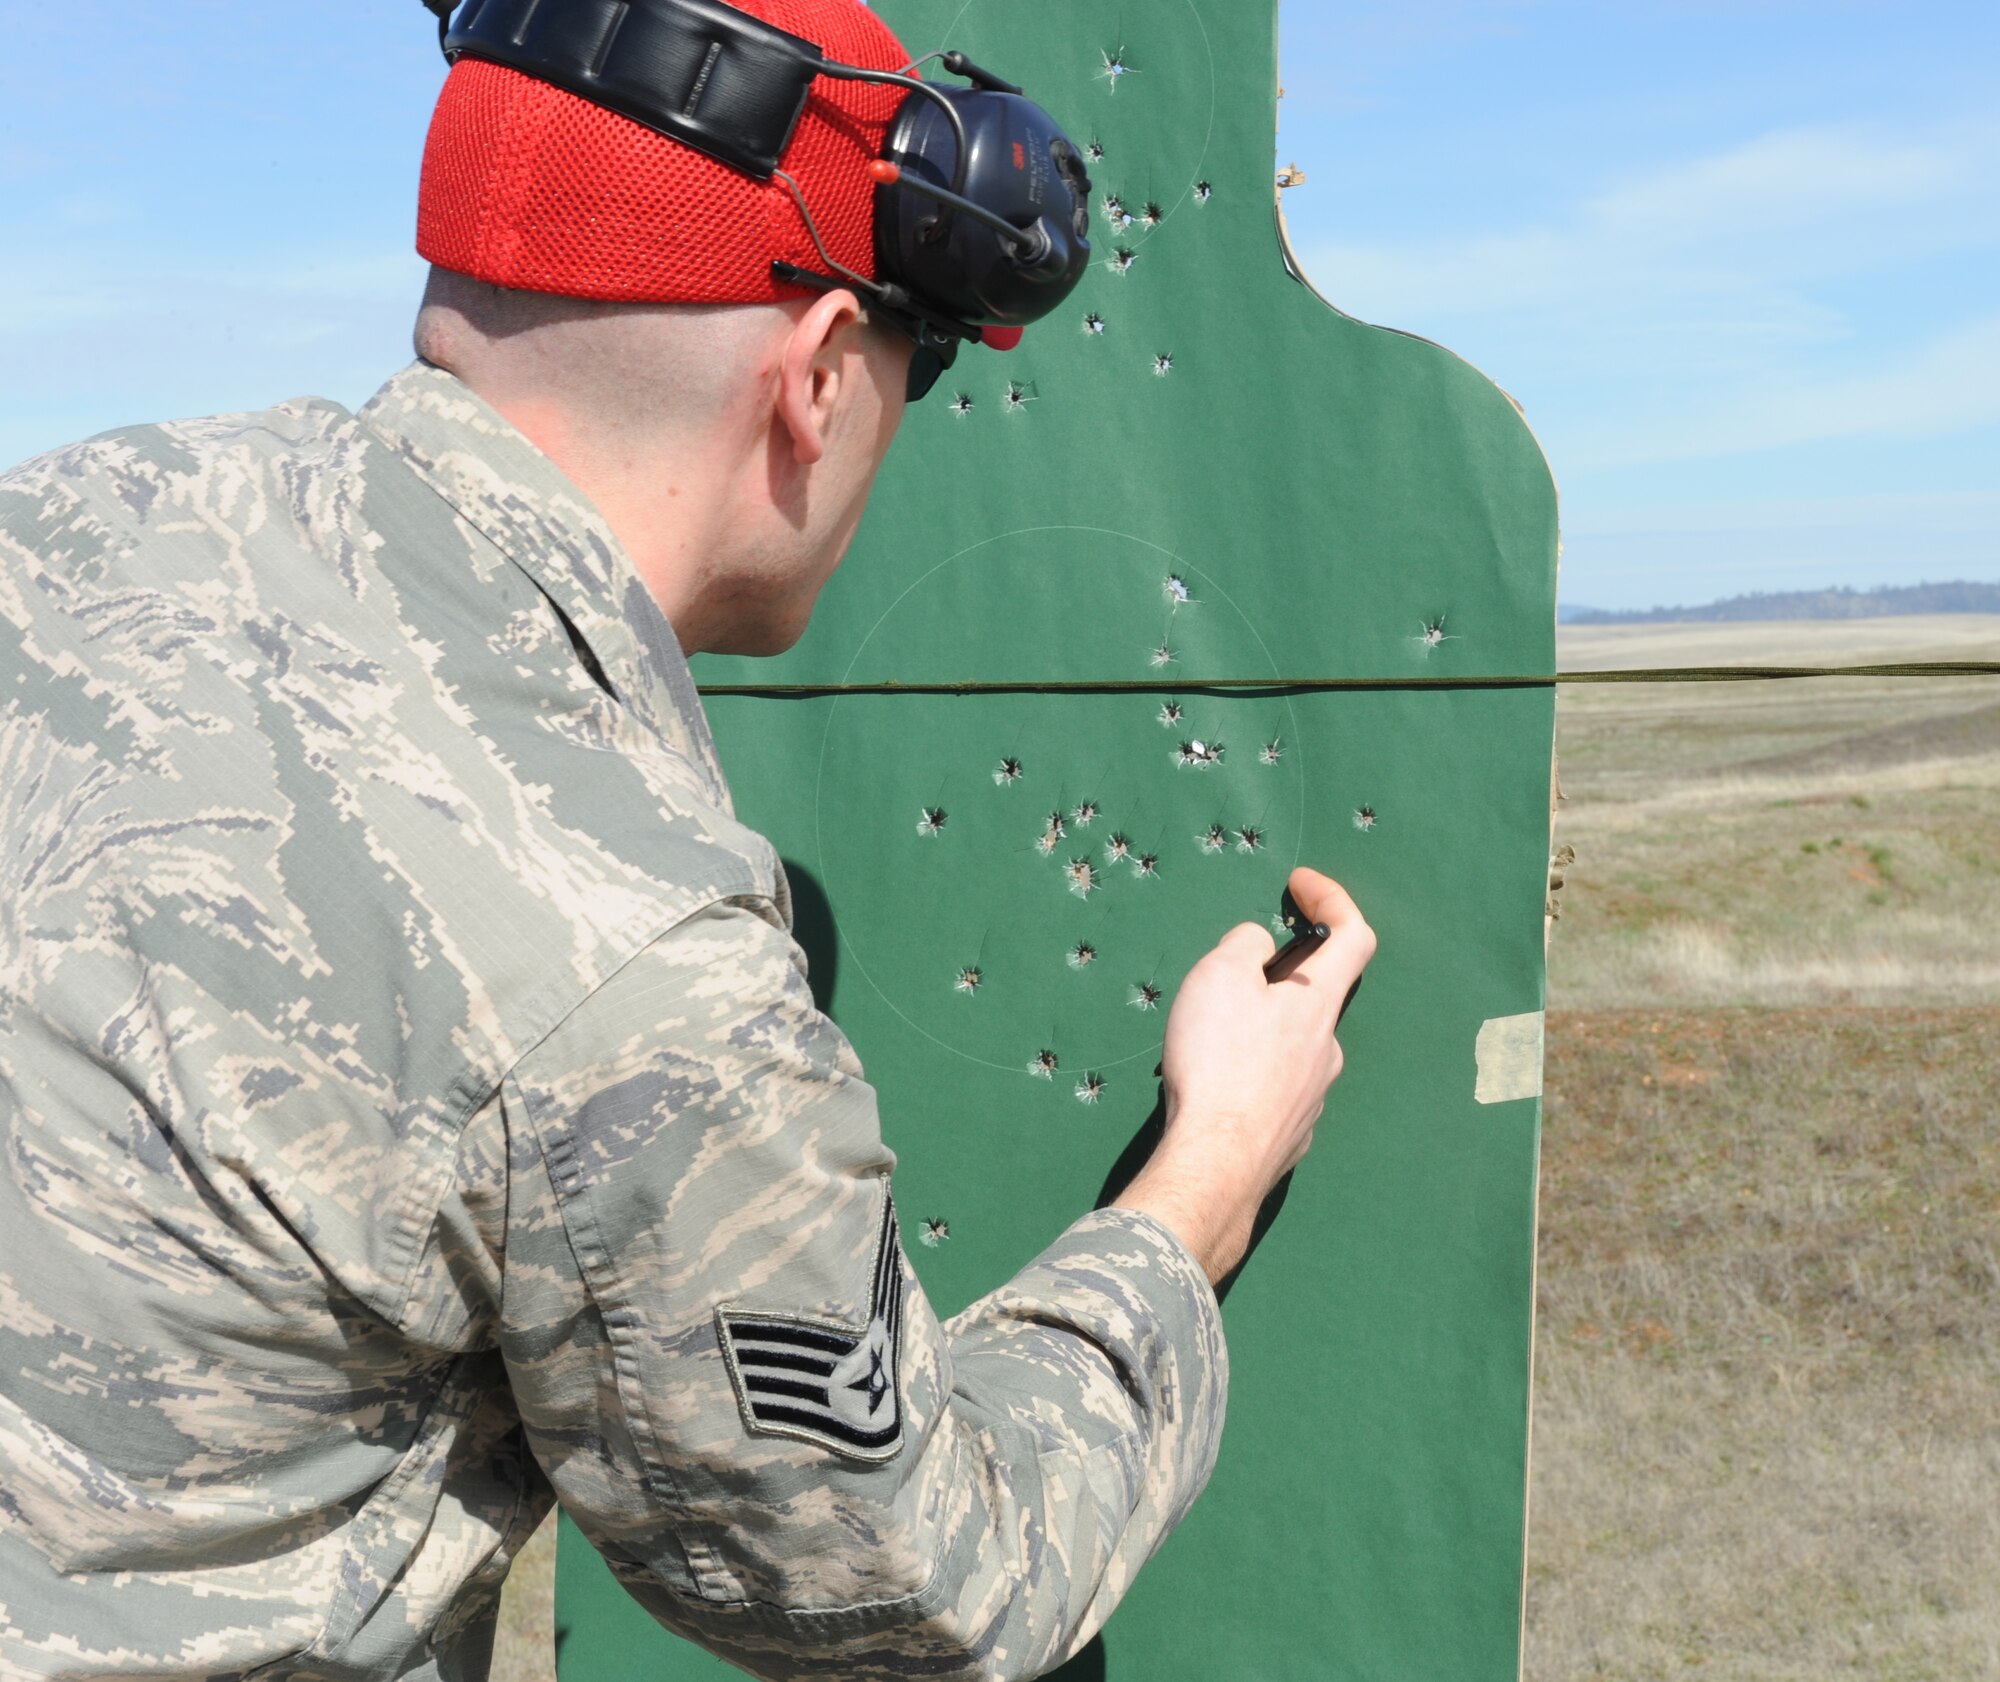 A 9th Security Forces Squadron combat arms instructor, grades a target during a weapons qualification course at Beale Air Force Base, Calif., Feb. 11, 2014. Students with high marksmanship scores in the M-16, M-4, or M-9 courses can be awarded the small arms marksmanship ribbon. (U.S. Air Force photo by Staff Sgt. Robert M. Trujillo/Released)